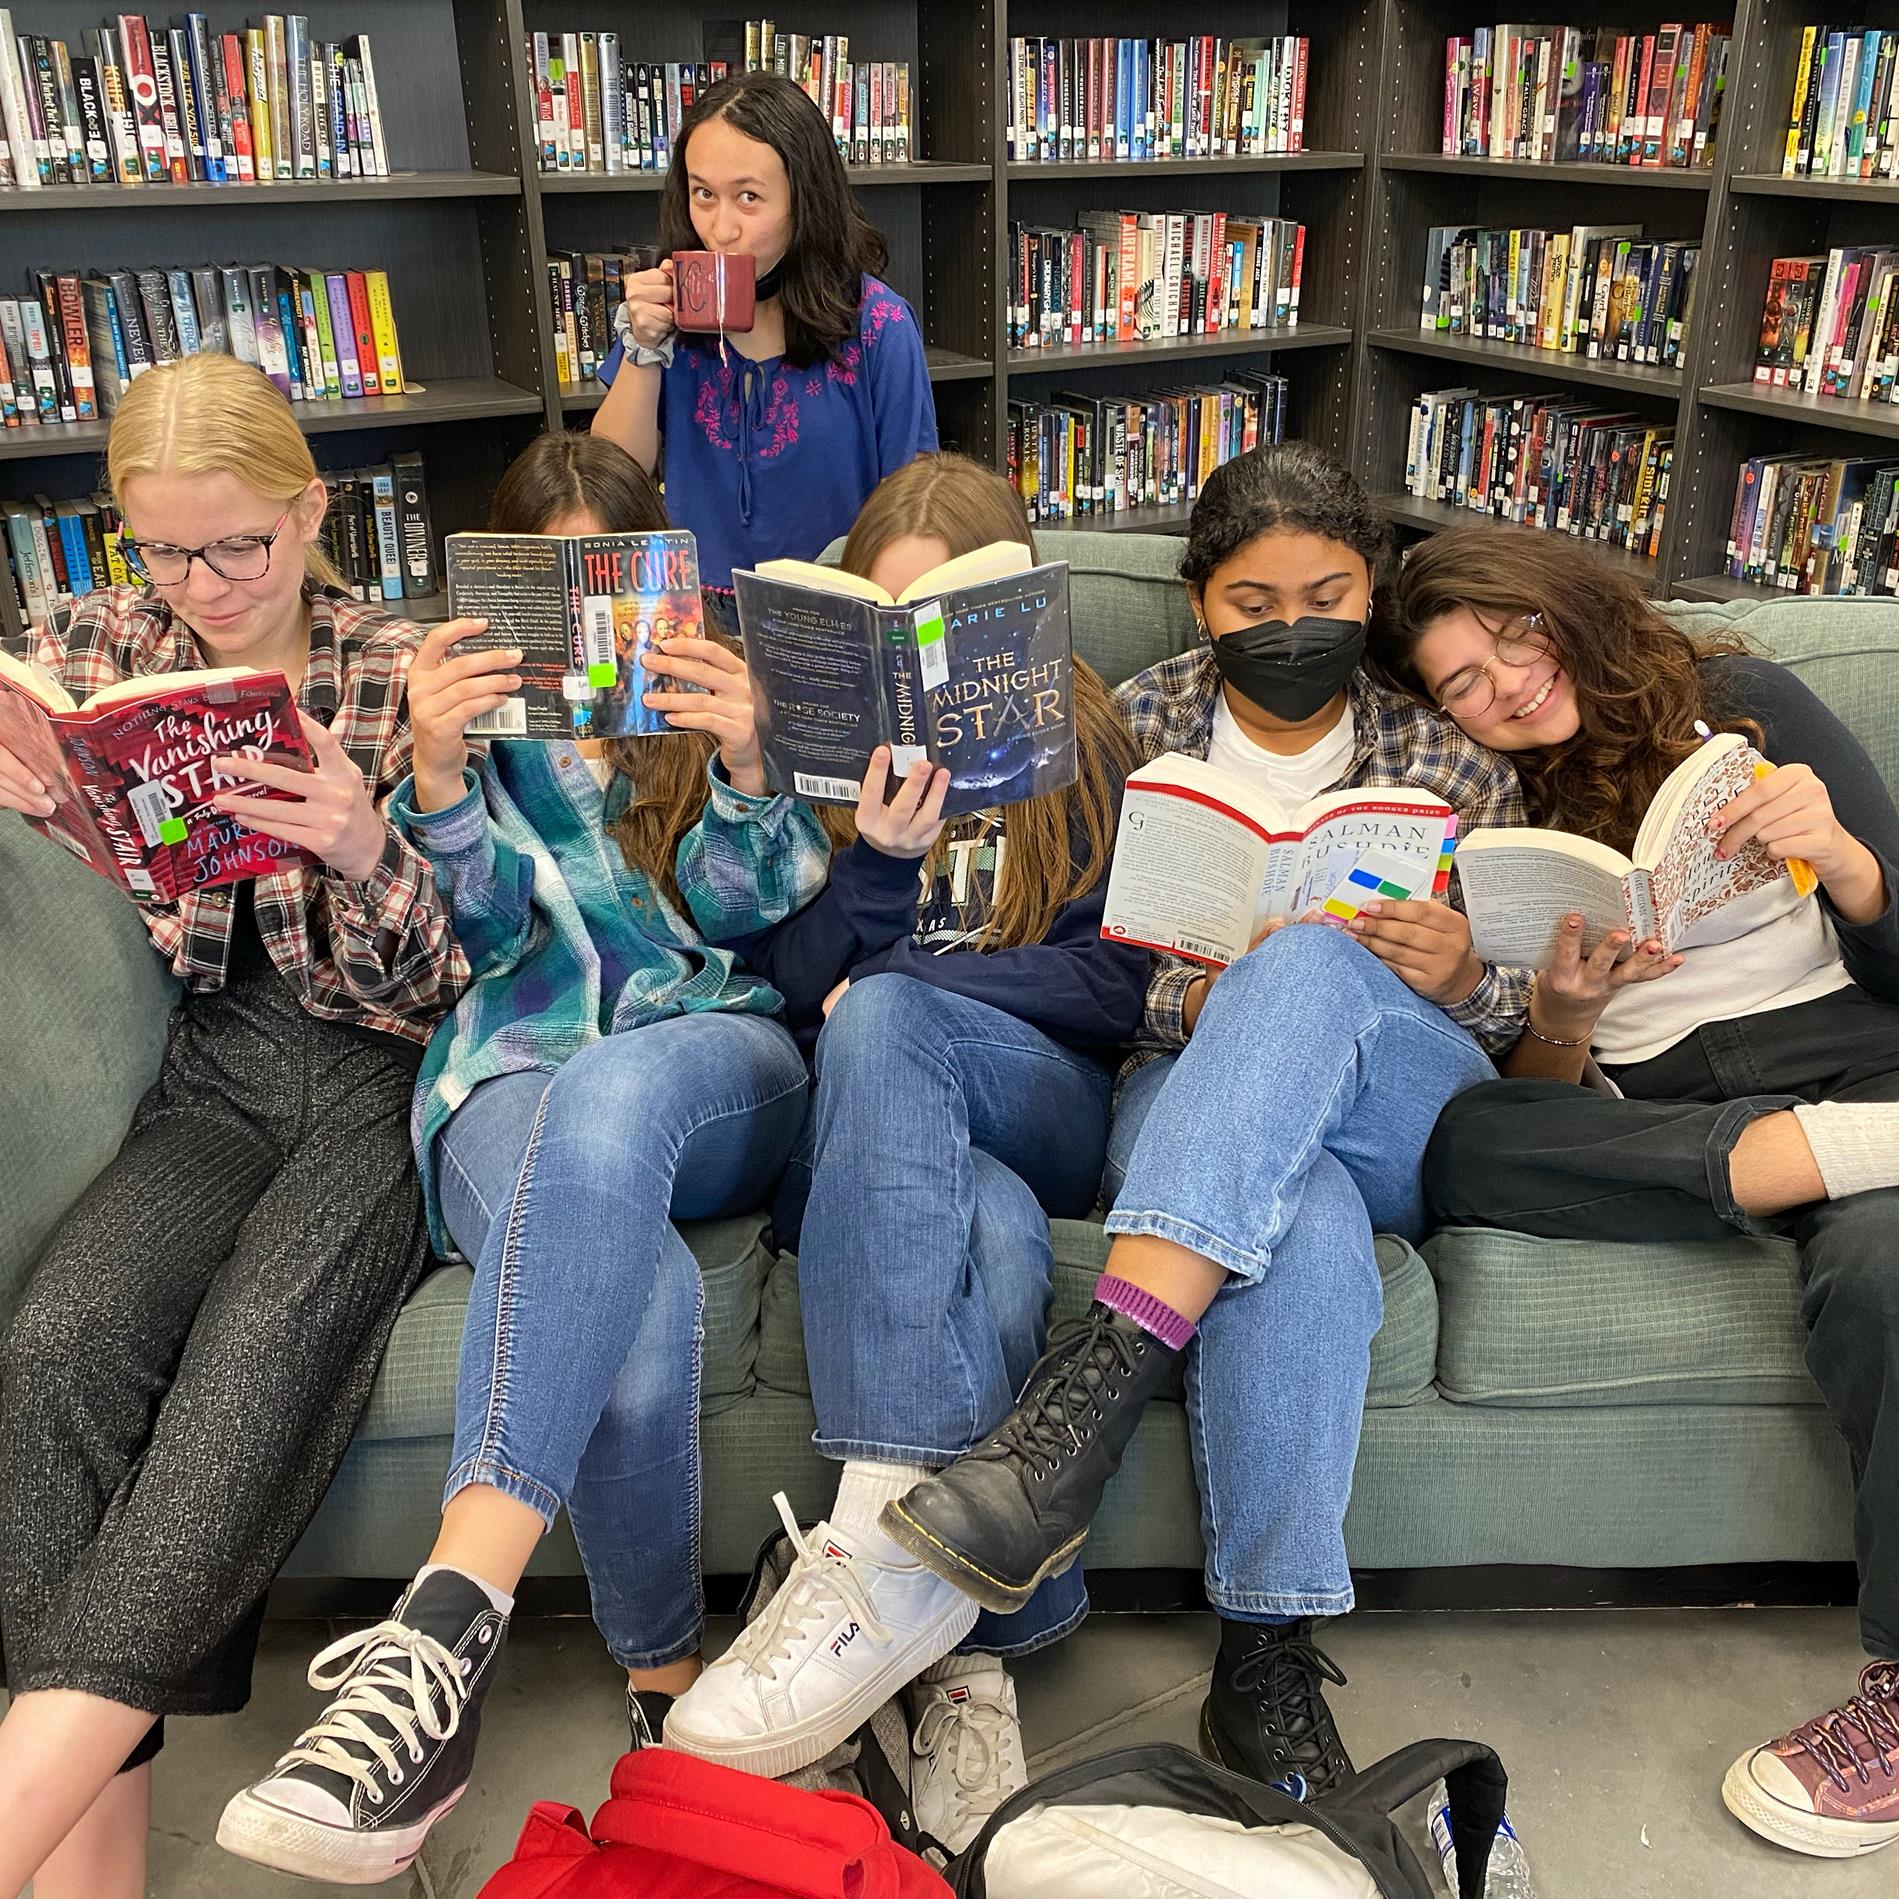 Lit Club getting cozy with books on the library sofa